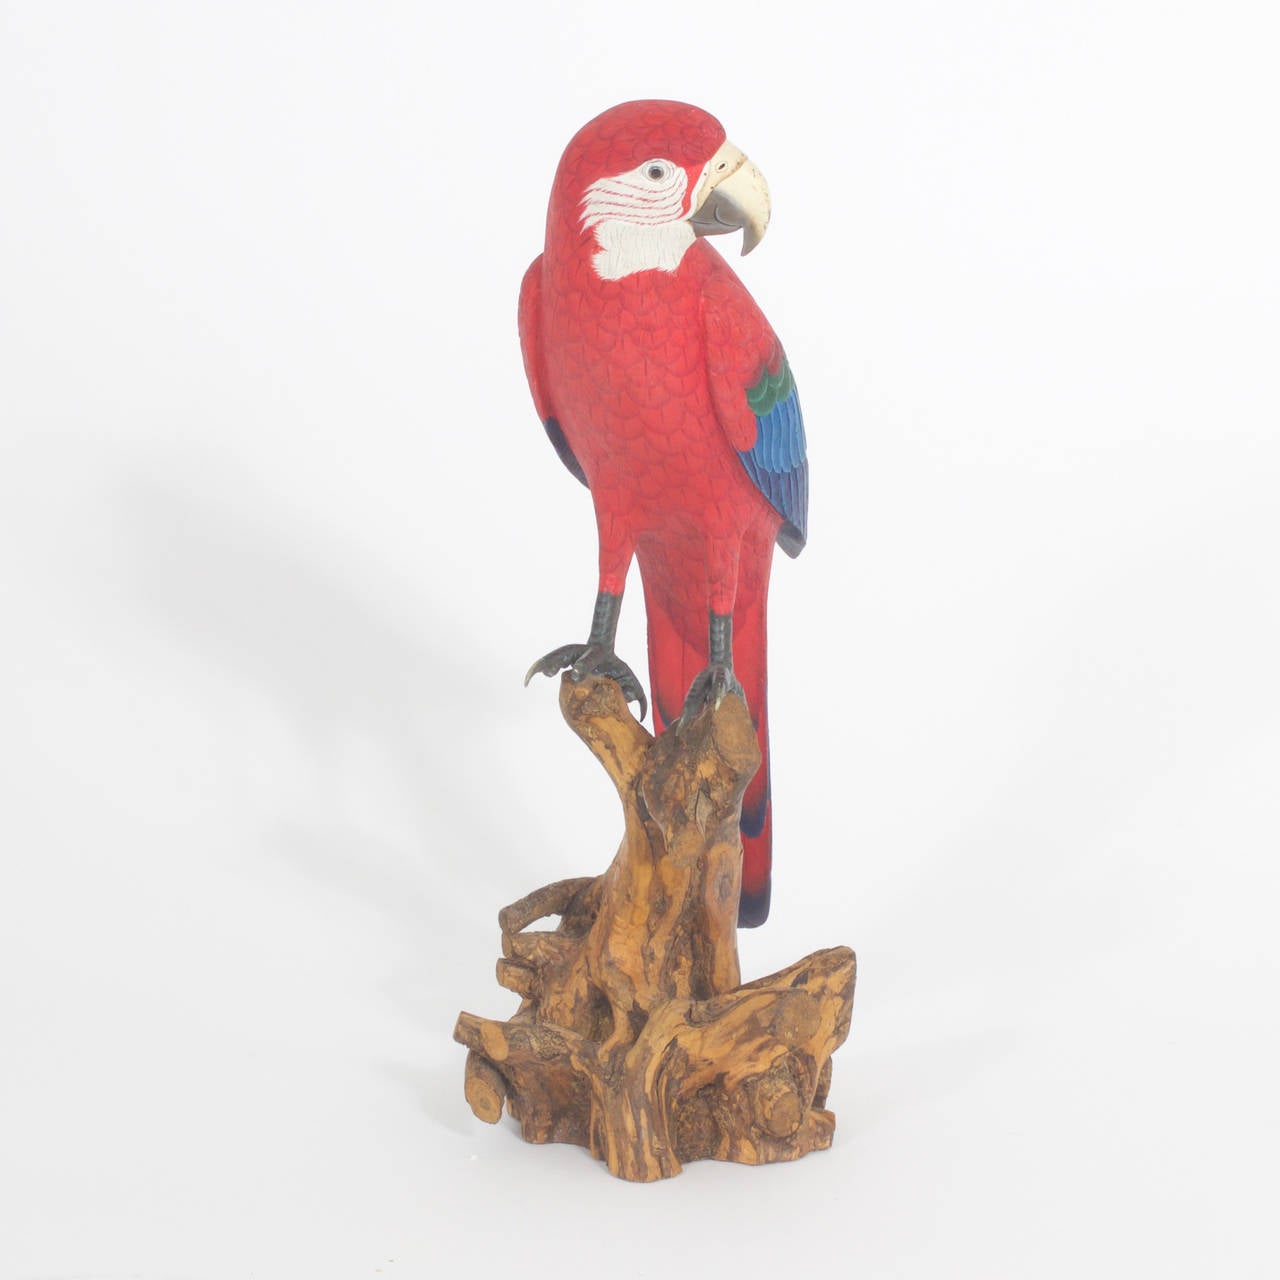 Carved and painted red parrot. Amazingly realistic wood carving of a multicolored Macaw parrot with glass eyes. Expertly carved and painted in hues of red, blue, green and white with real bird talons attached to the feet and presented on a tree